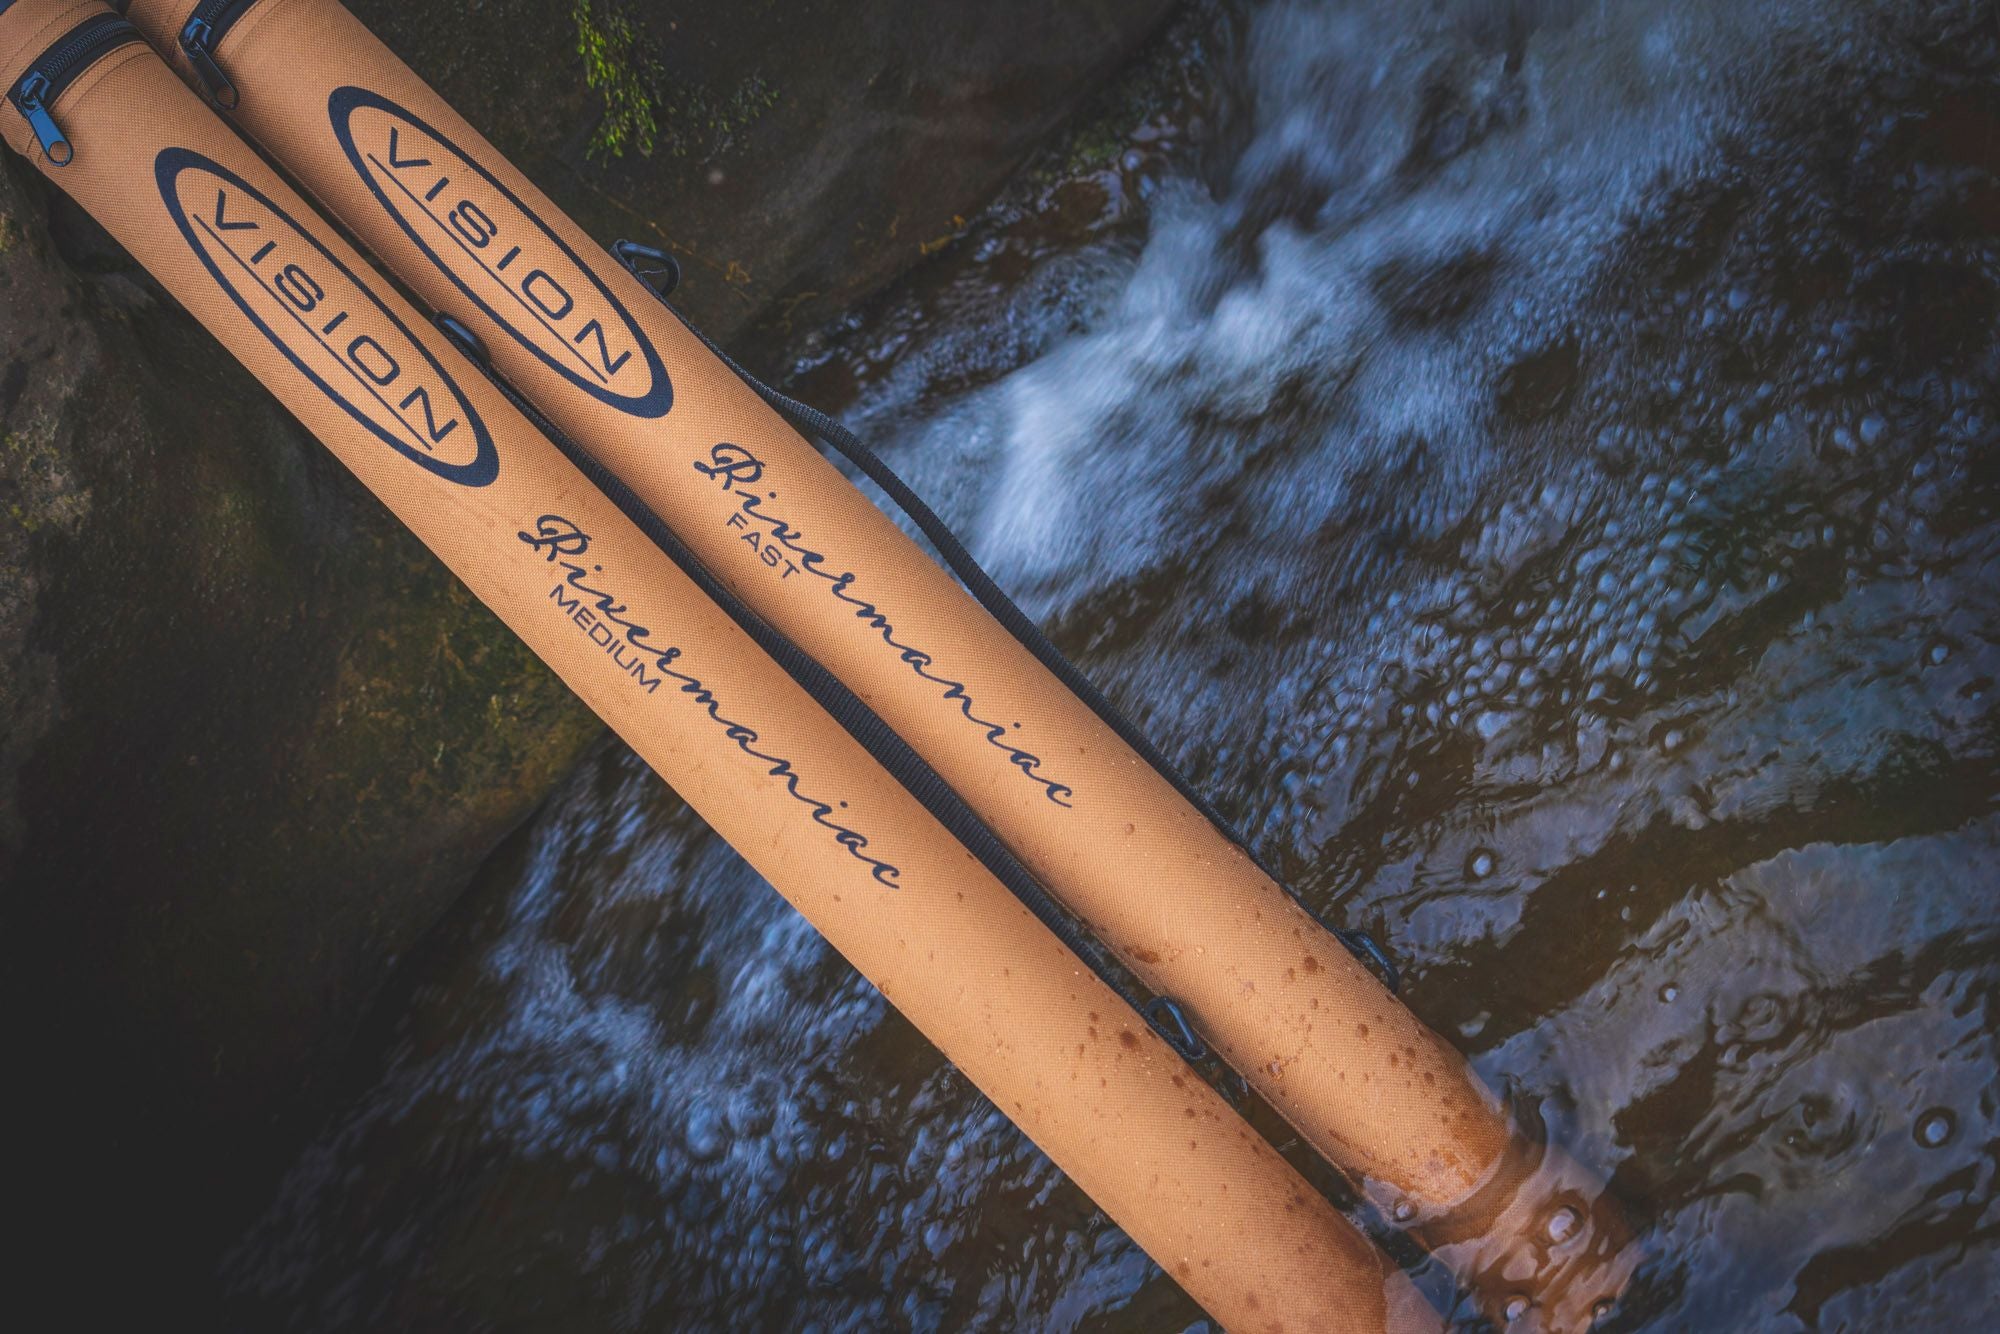 VISION RIVERMANIAC FLY RODS  - SAVE £100 OFF RRP!